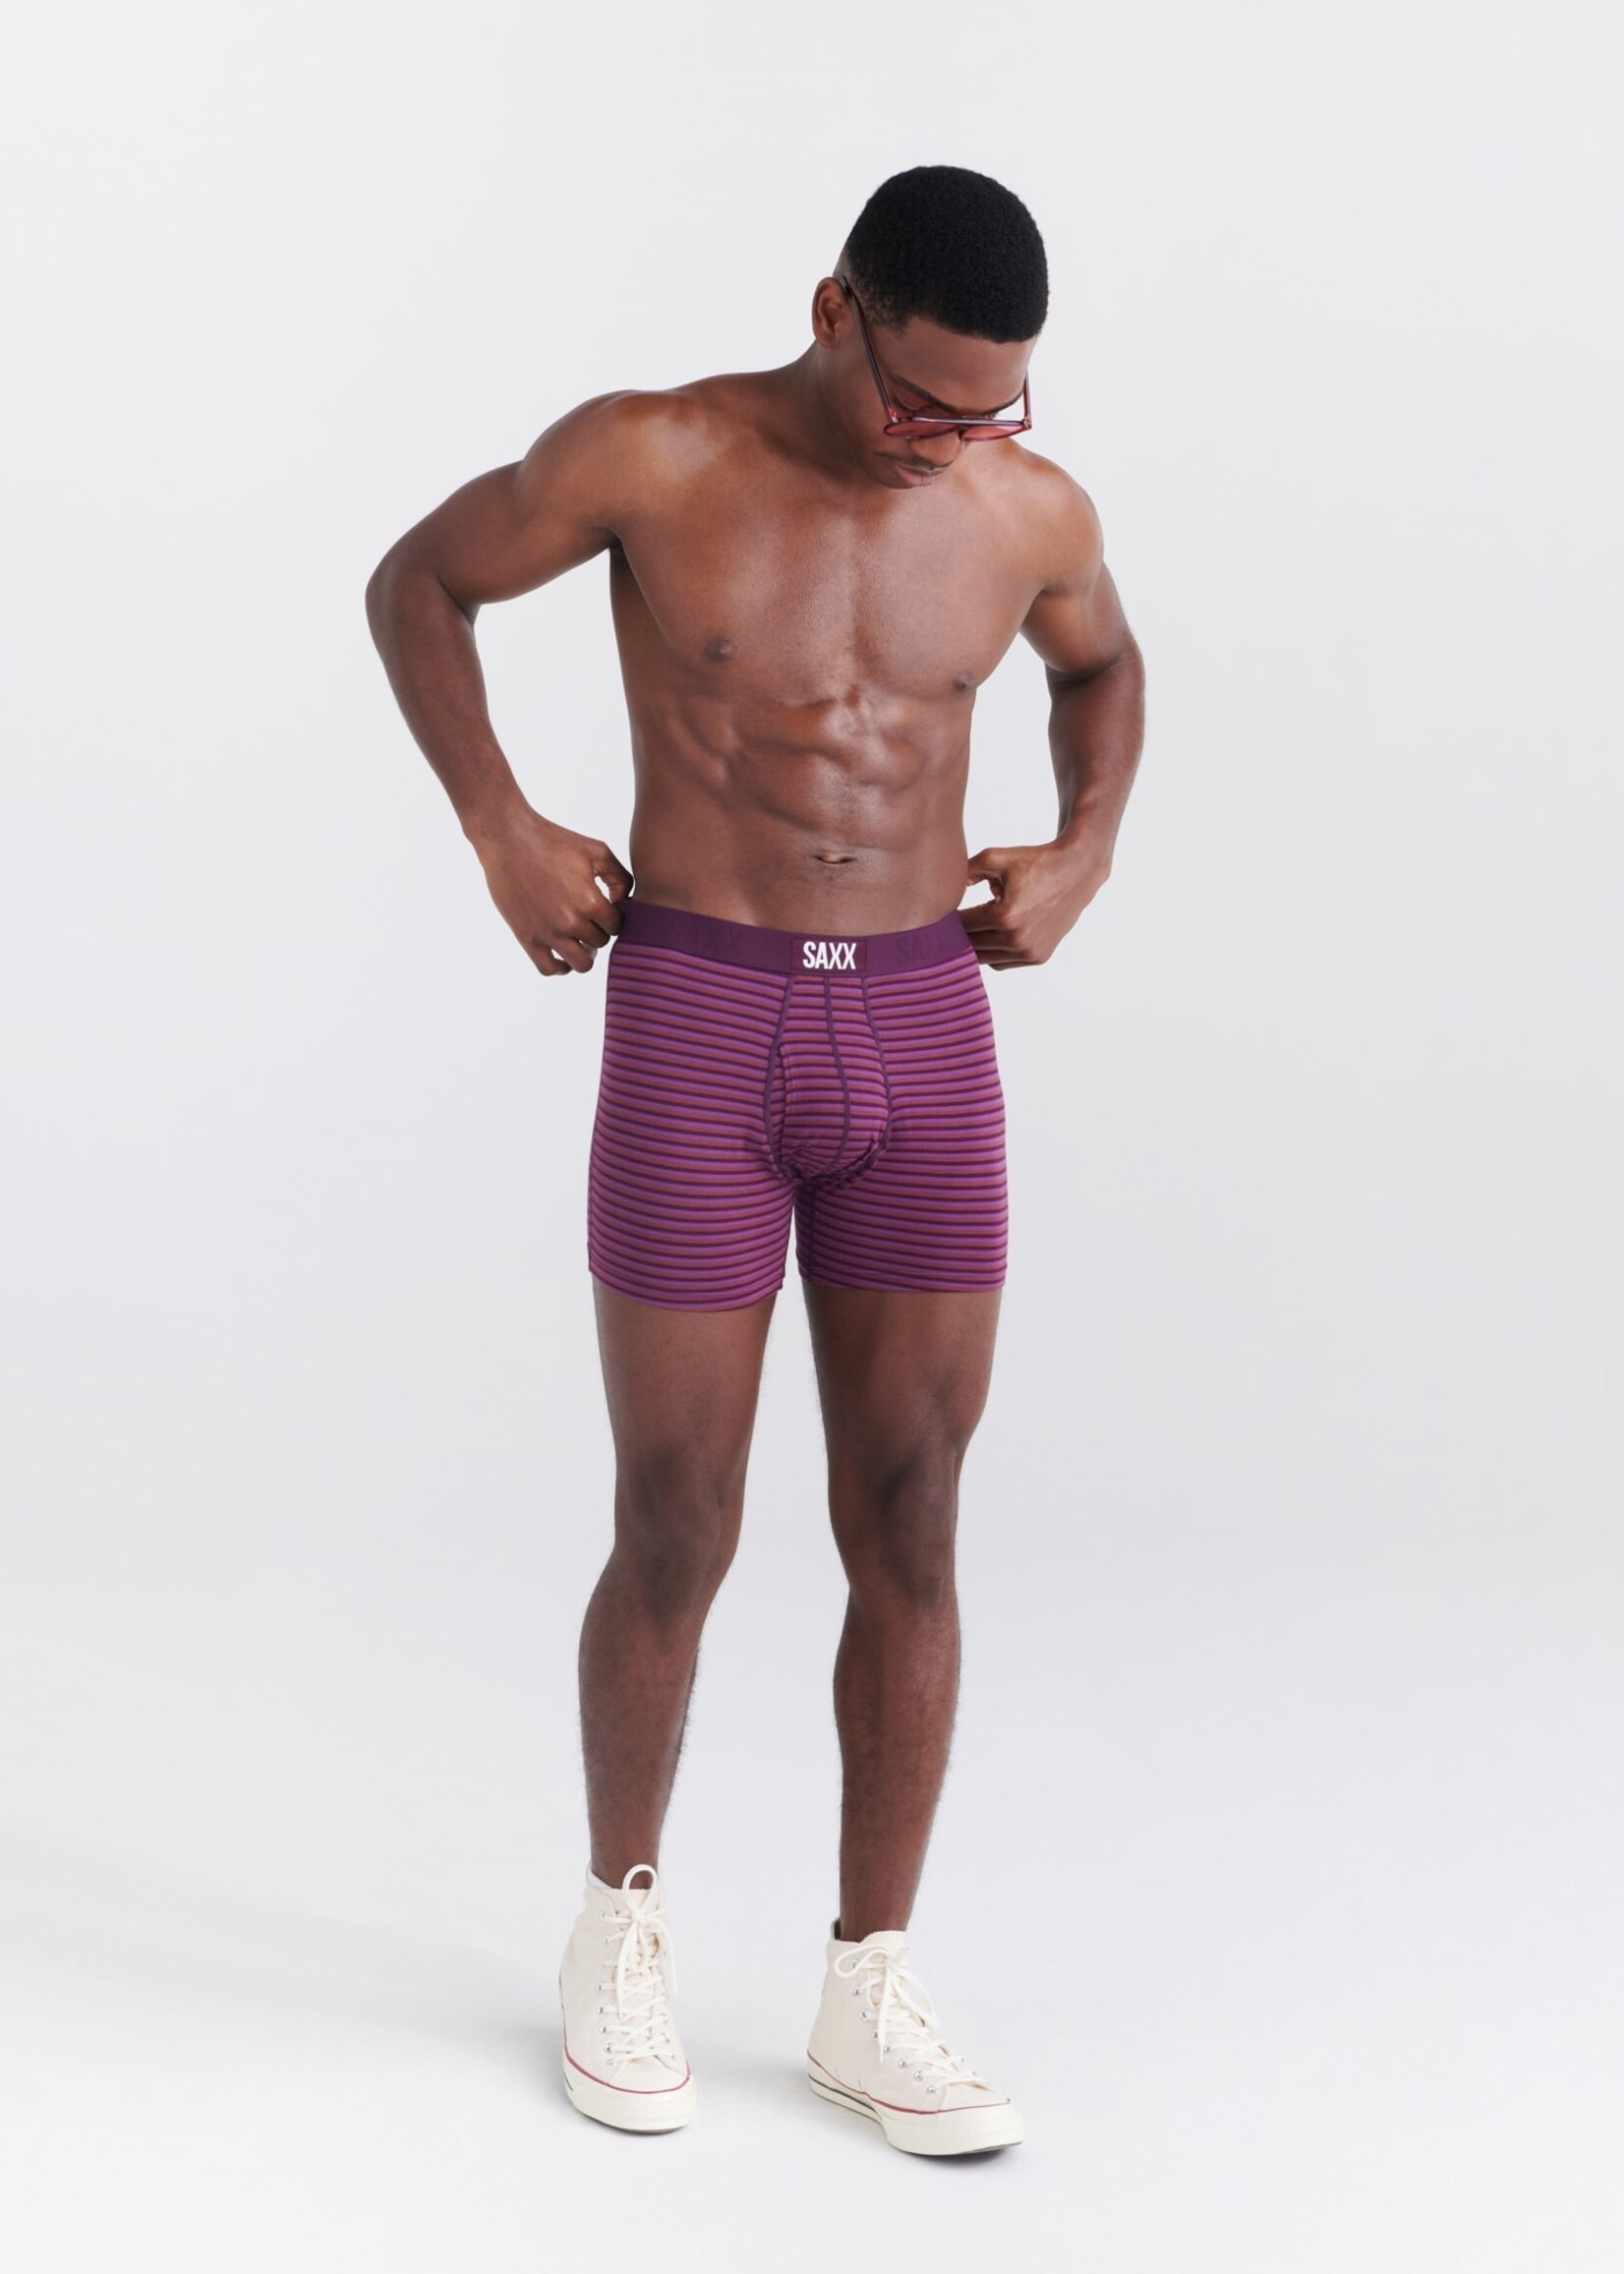 Saxx Ultra Boxer Brief with Fly